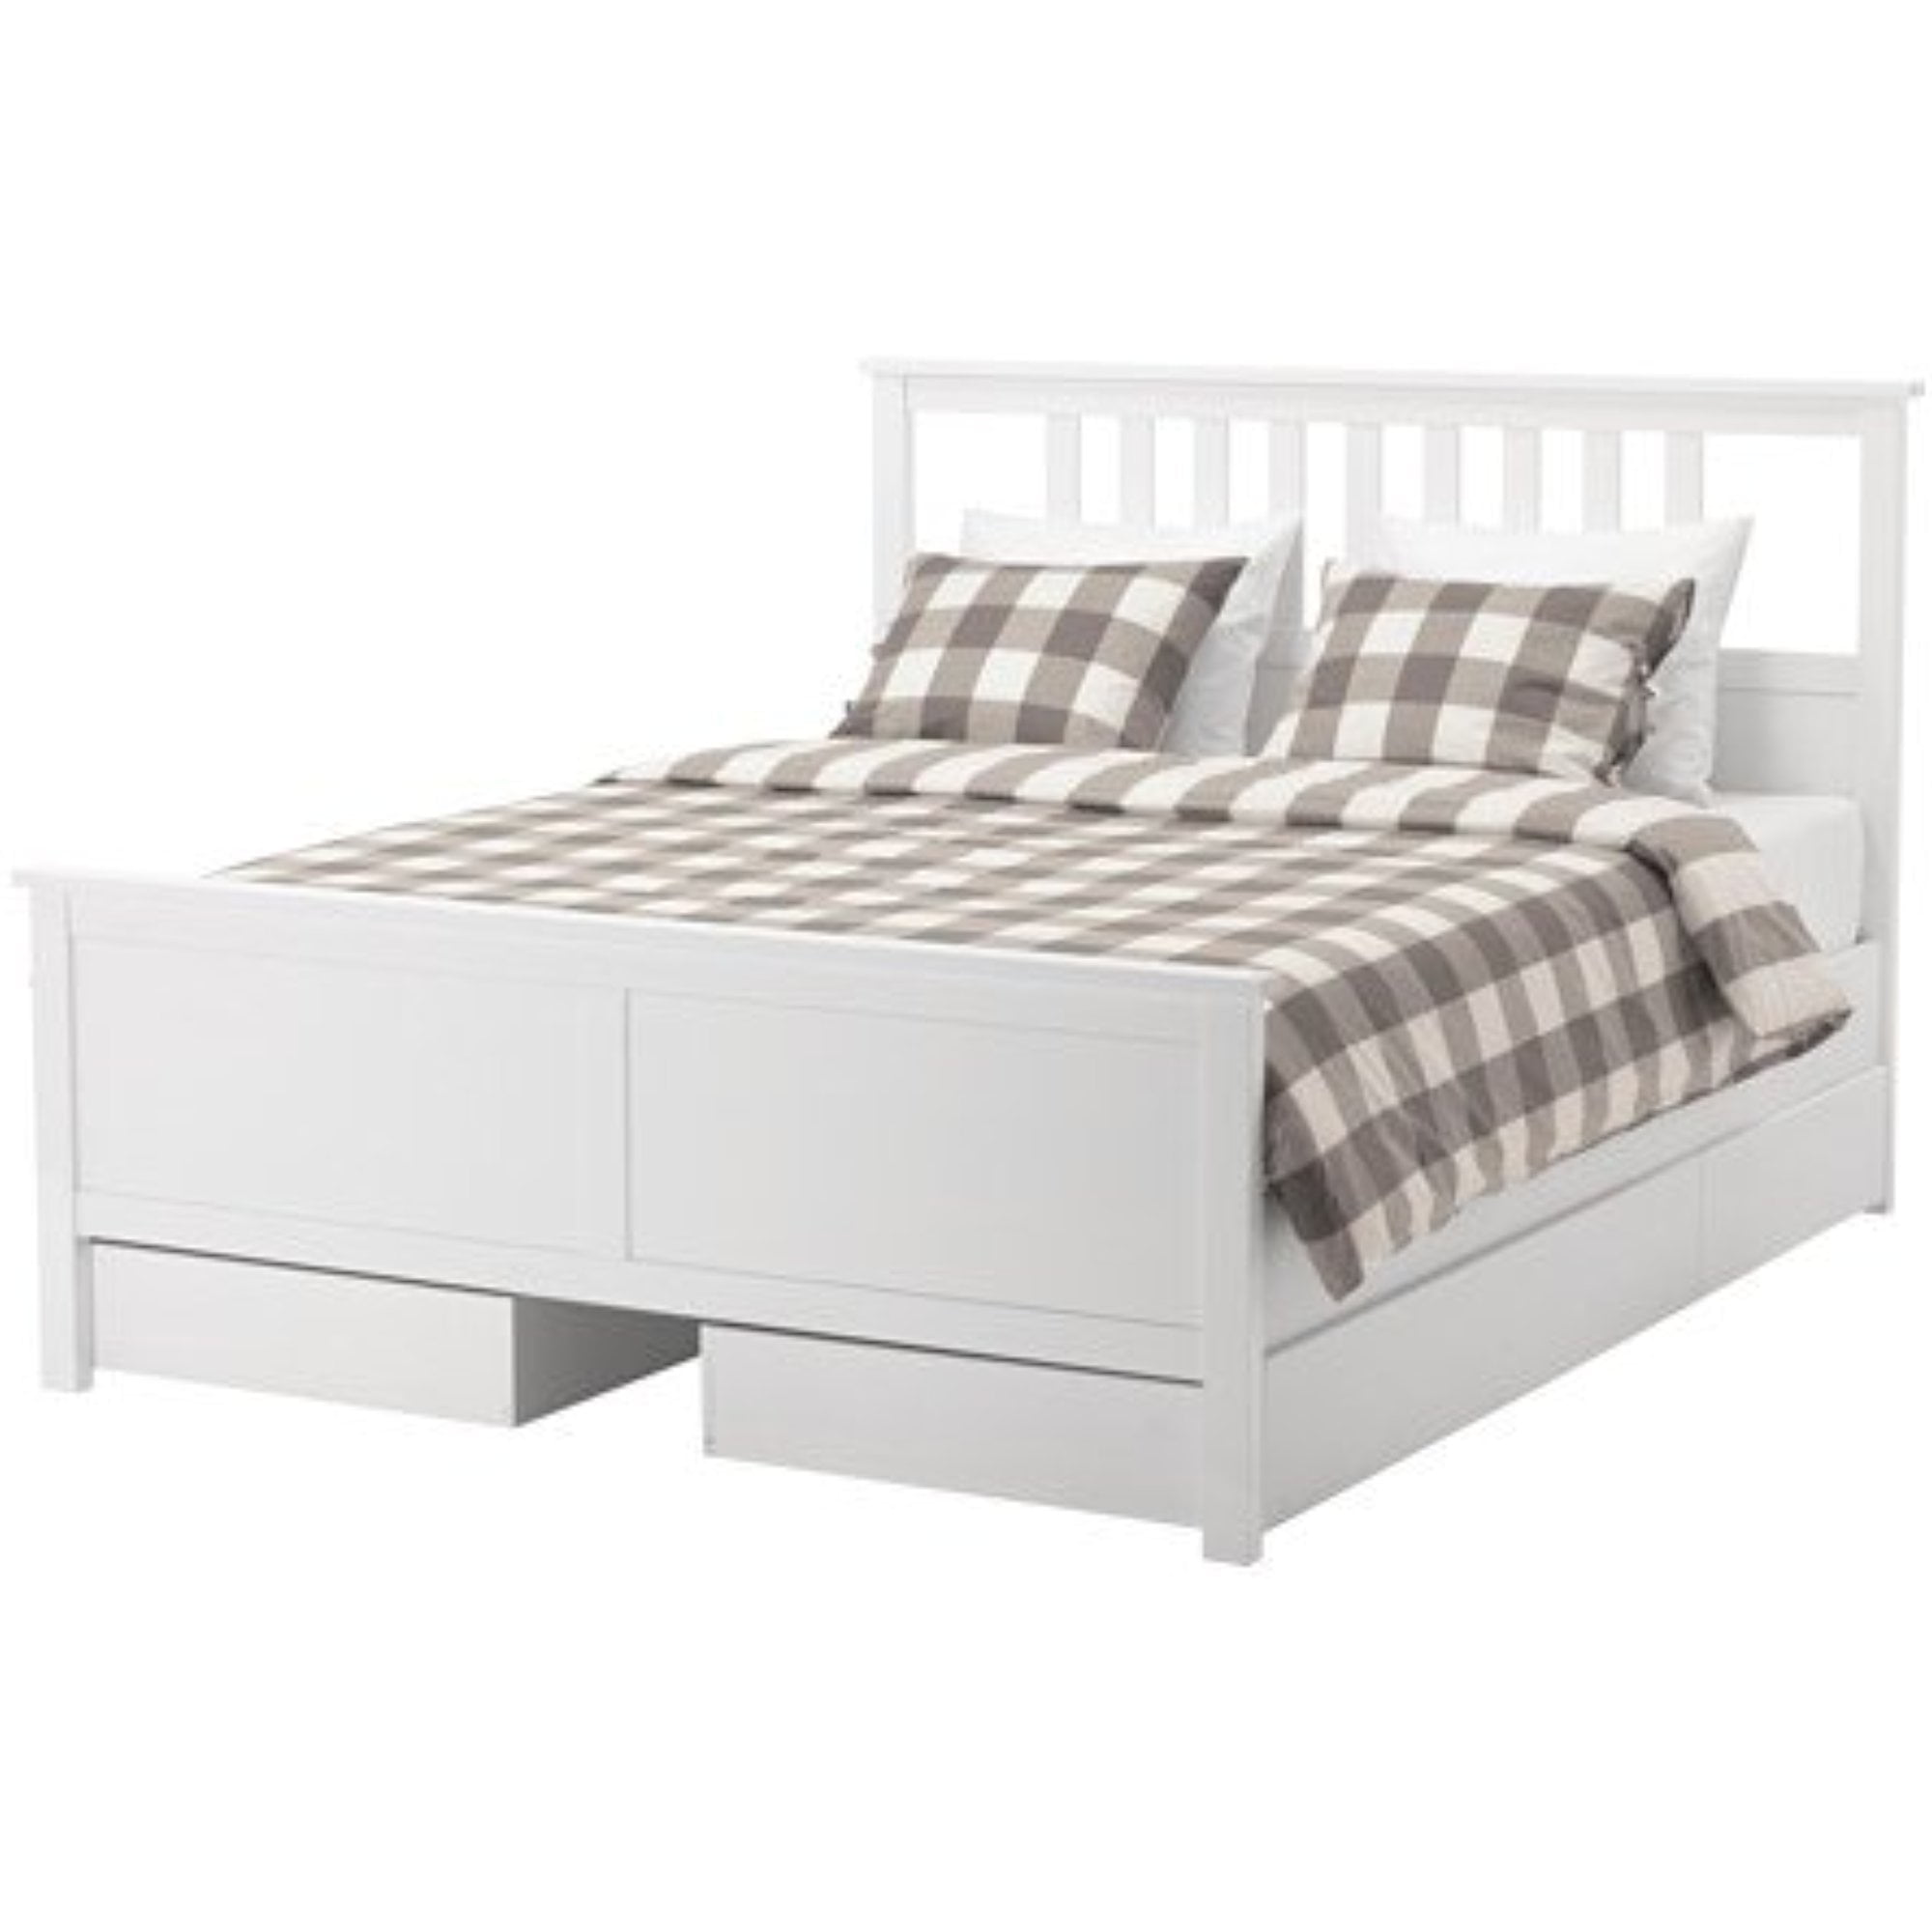 Ikea King Size Bed Frame With 4 Storage, Ikea King Bed With Storage